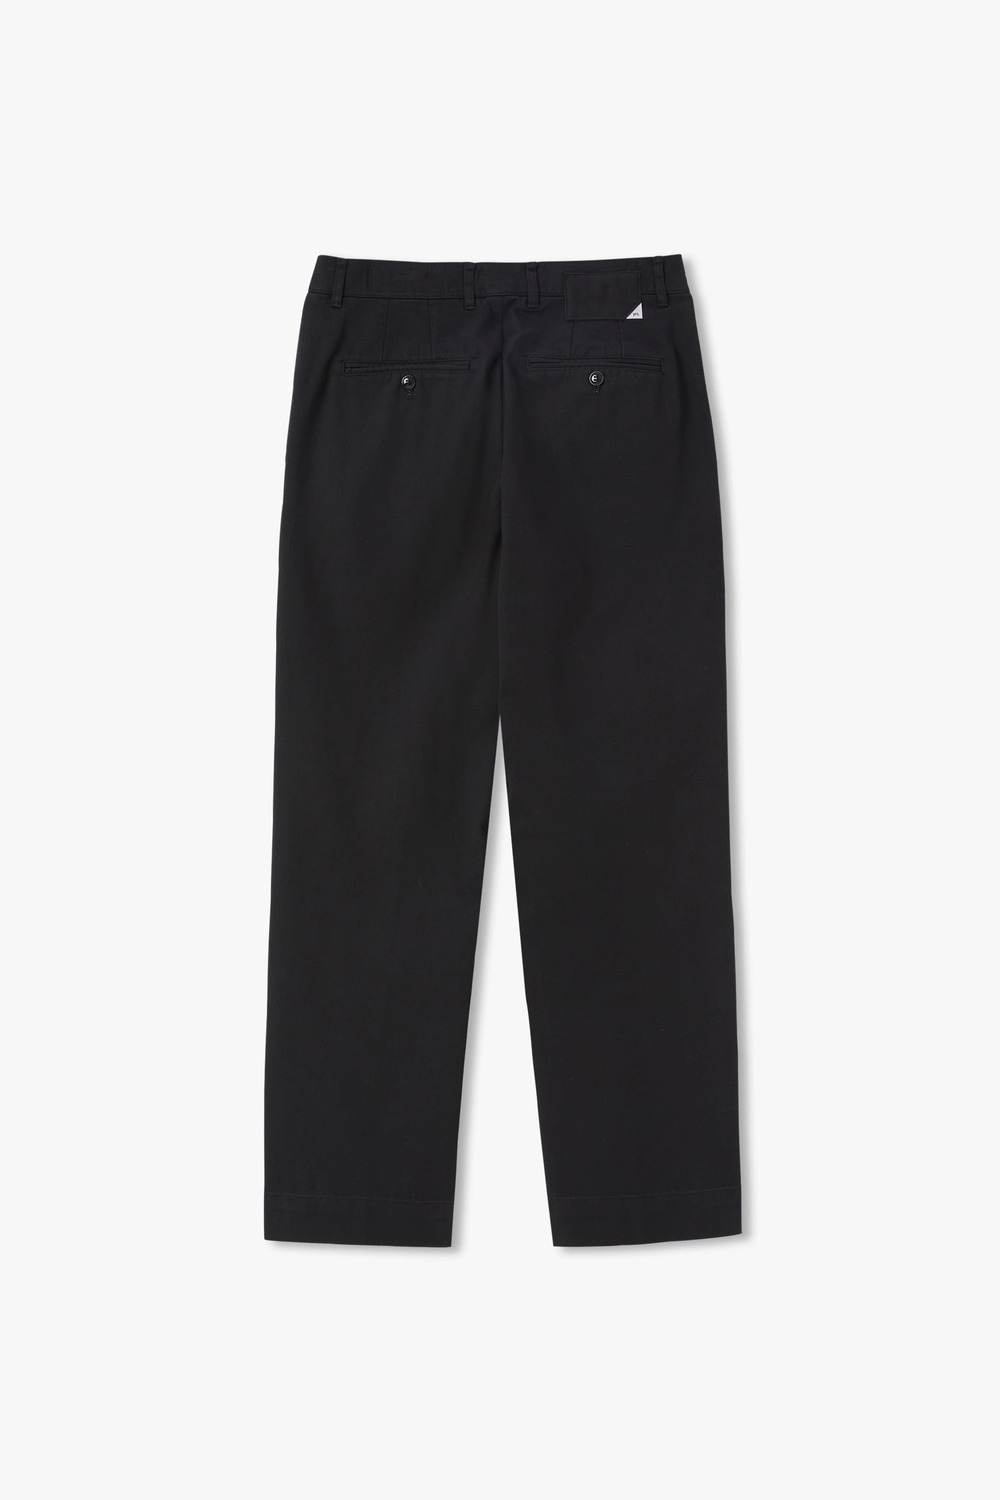 WASHED BLACK R-801 STRAIGHT COTTON DRILL WASHED CHINO PANTS (ECP GARMENT PROCESS)